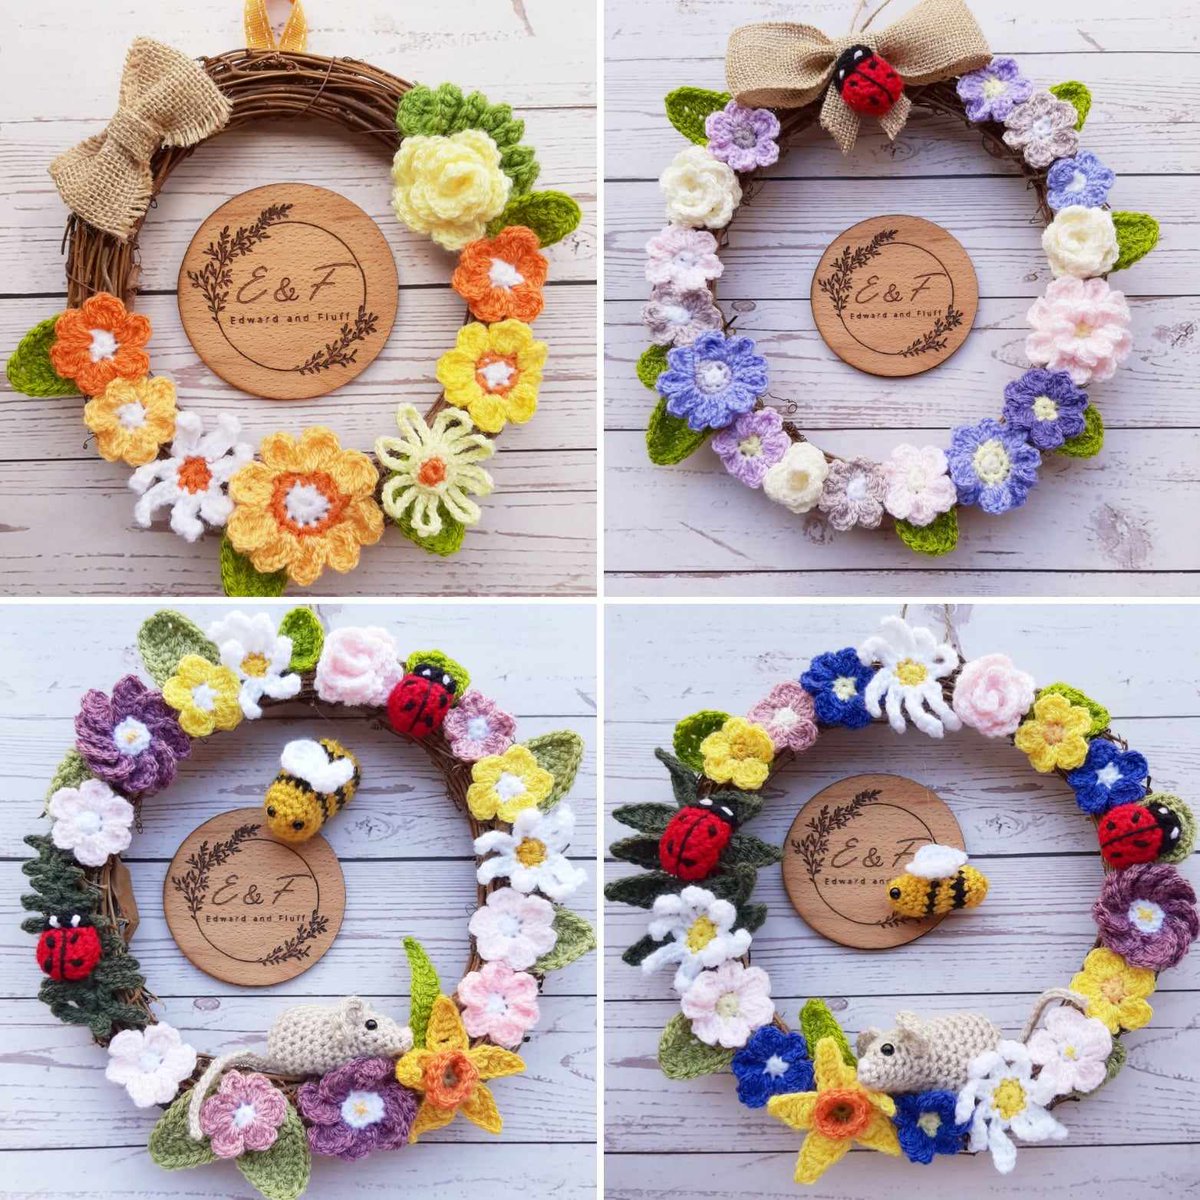 These spring and summer colourful crochet wreaths will really brighten up a room 🌞🌺🌻🌷💐🌸🪻 Available in my Etsy shop at edwardandfluff.etsy.com #ukgiftam #ukgifthour #CraftBizParty #SmallBusiness #etsyseller #crochetwreath #crochet #handmadewithlove